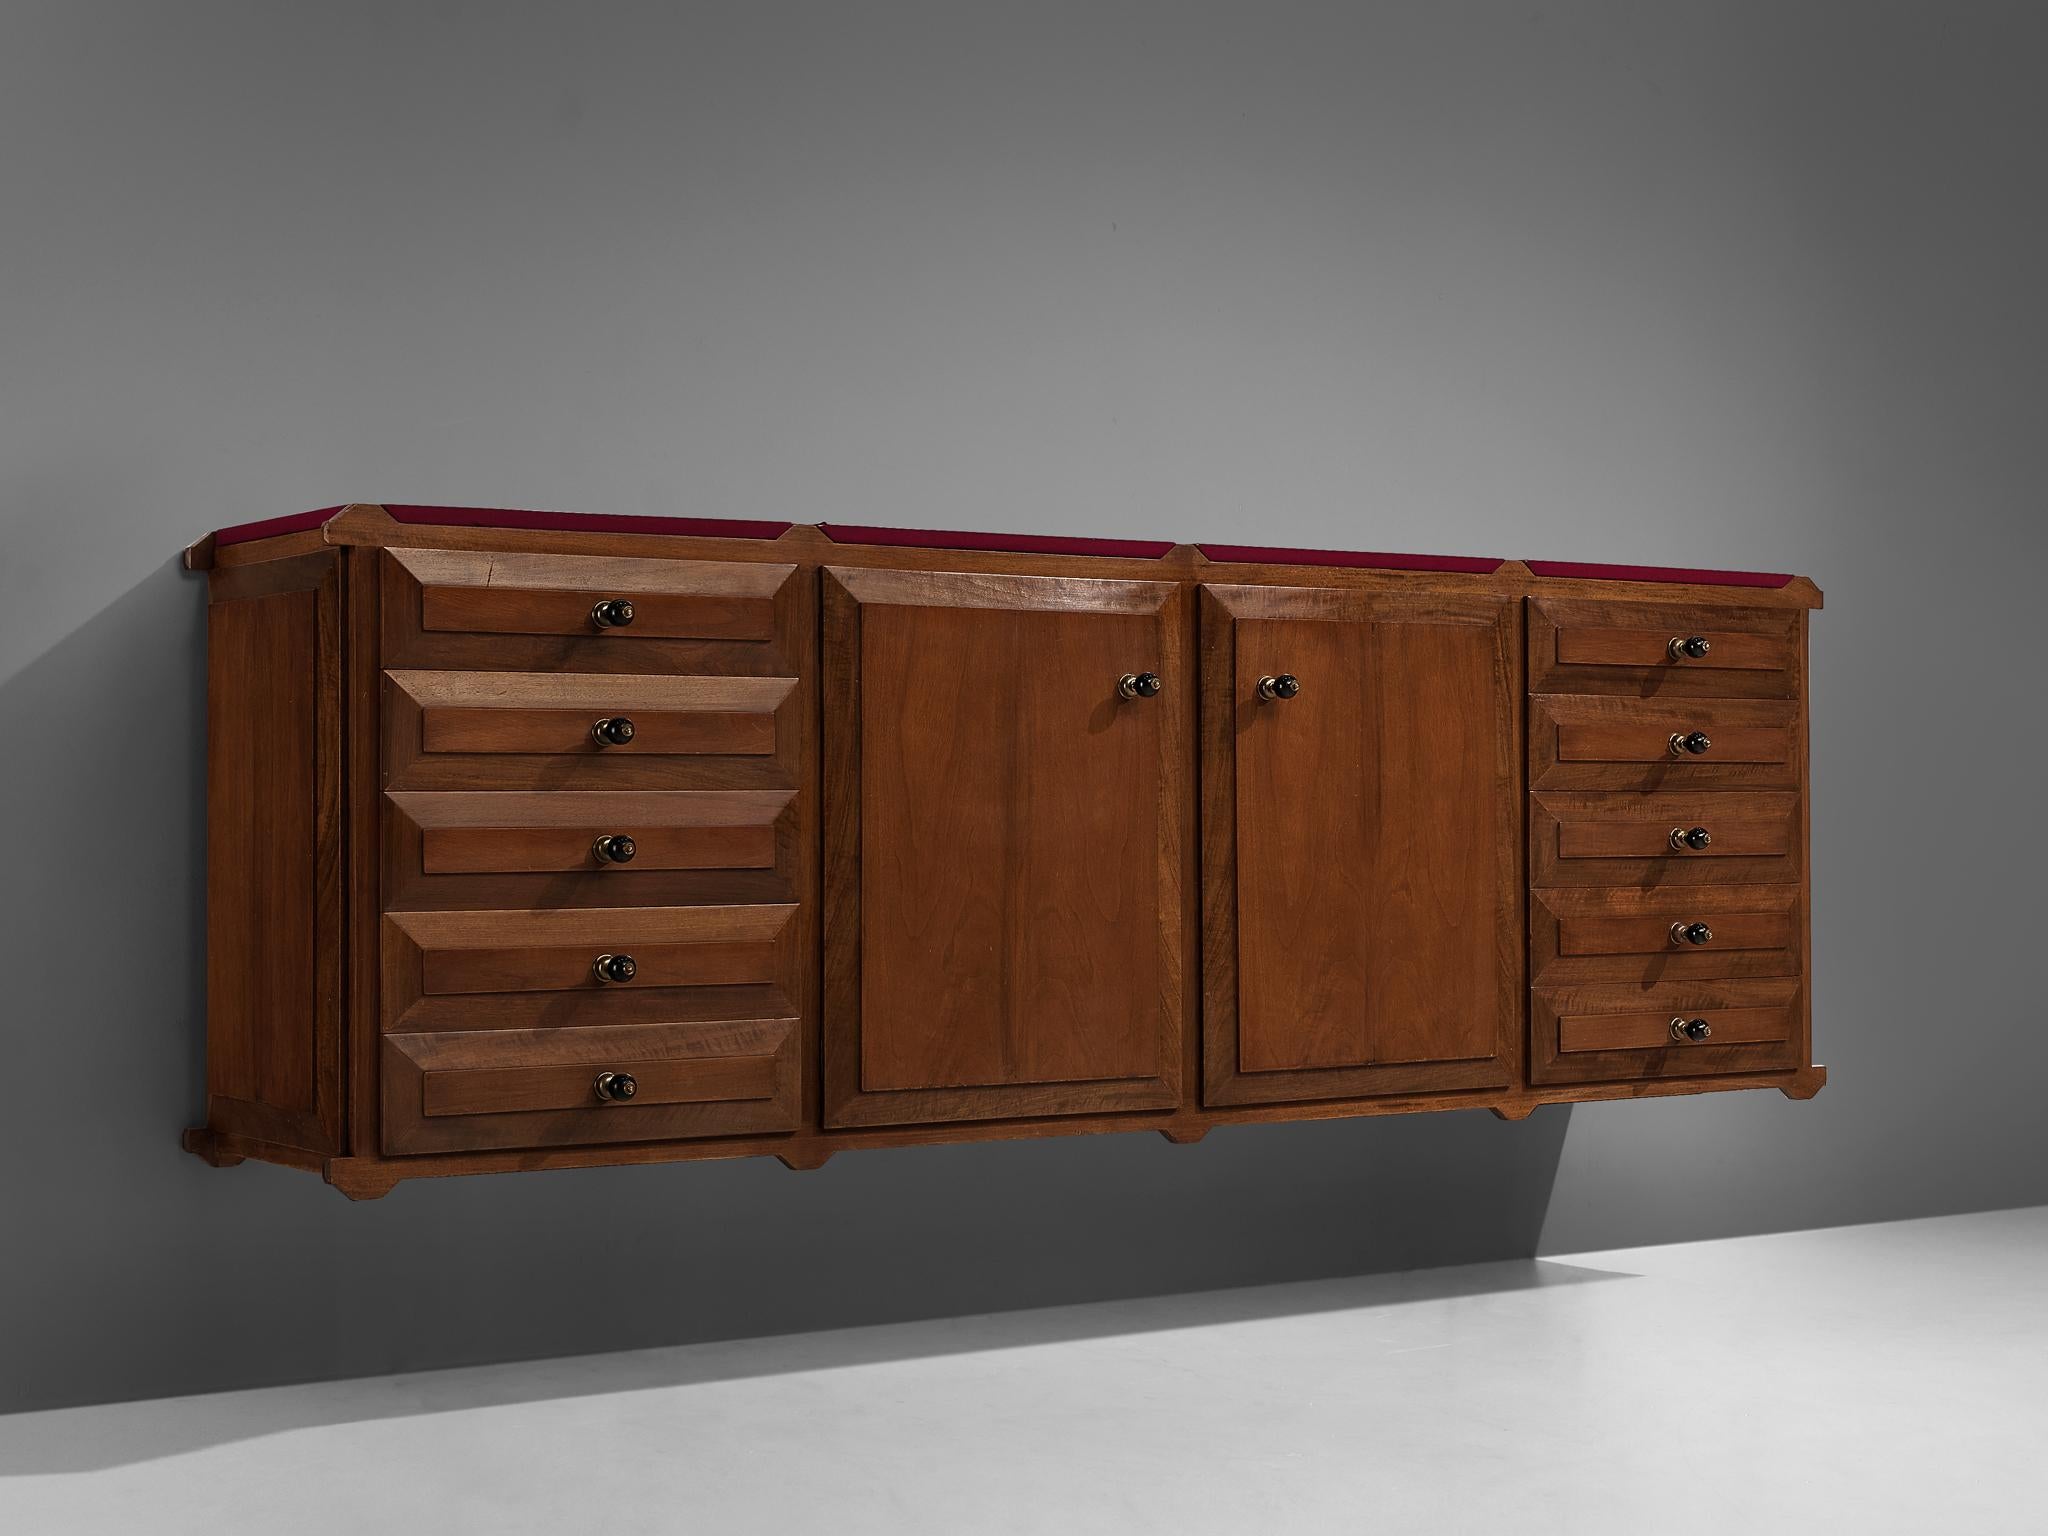 Mid-20th Century Italian Sideboard with Drawers in Walnut with Brass Handles For Sale